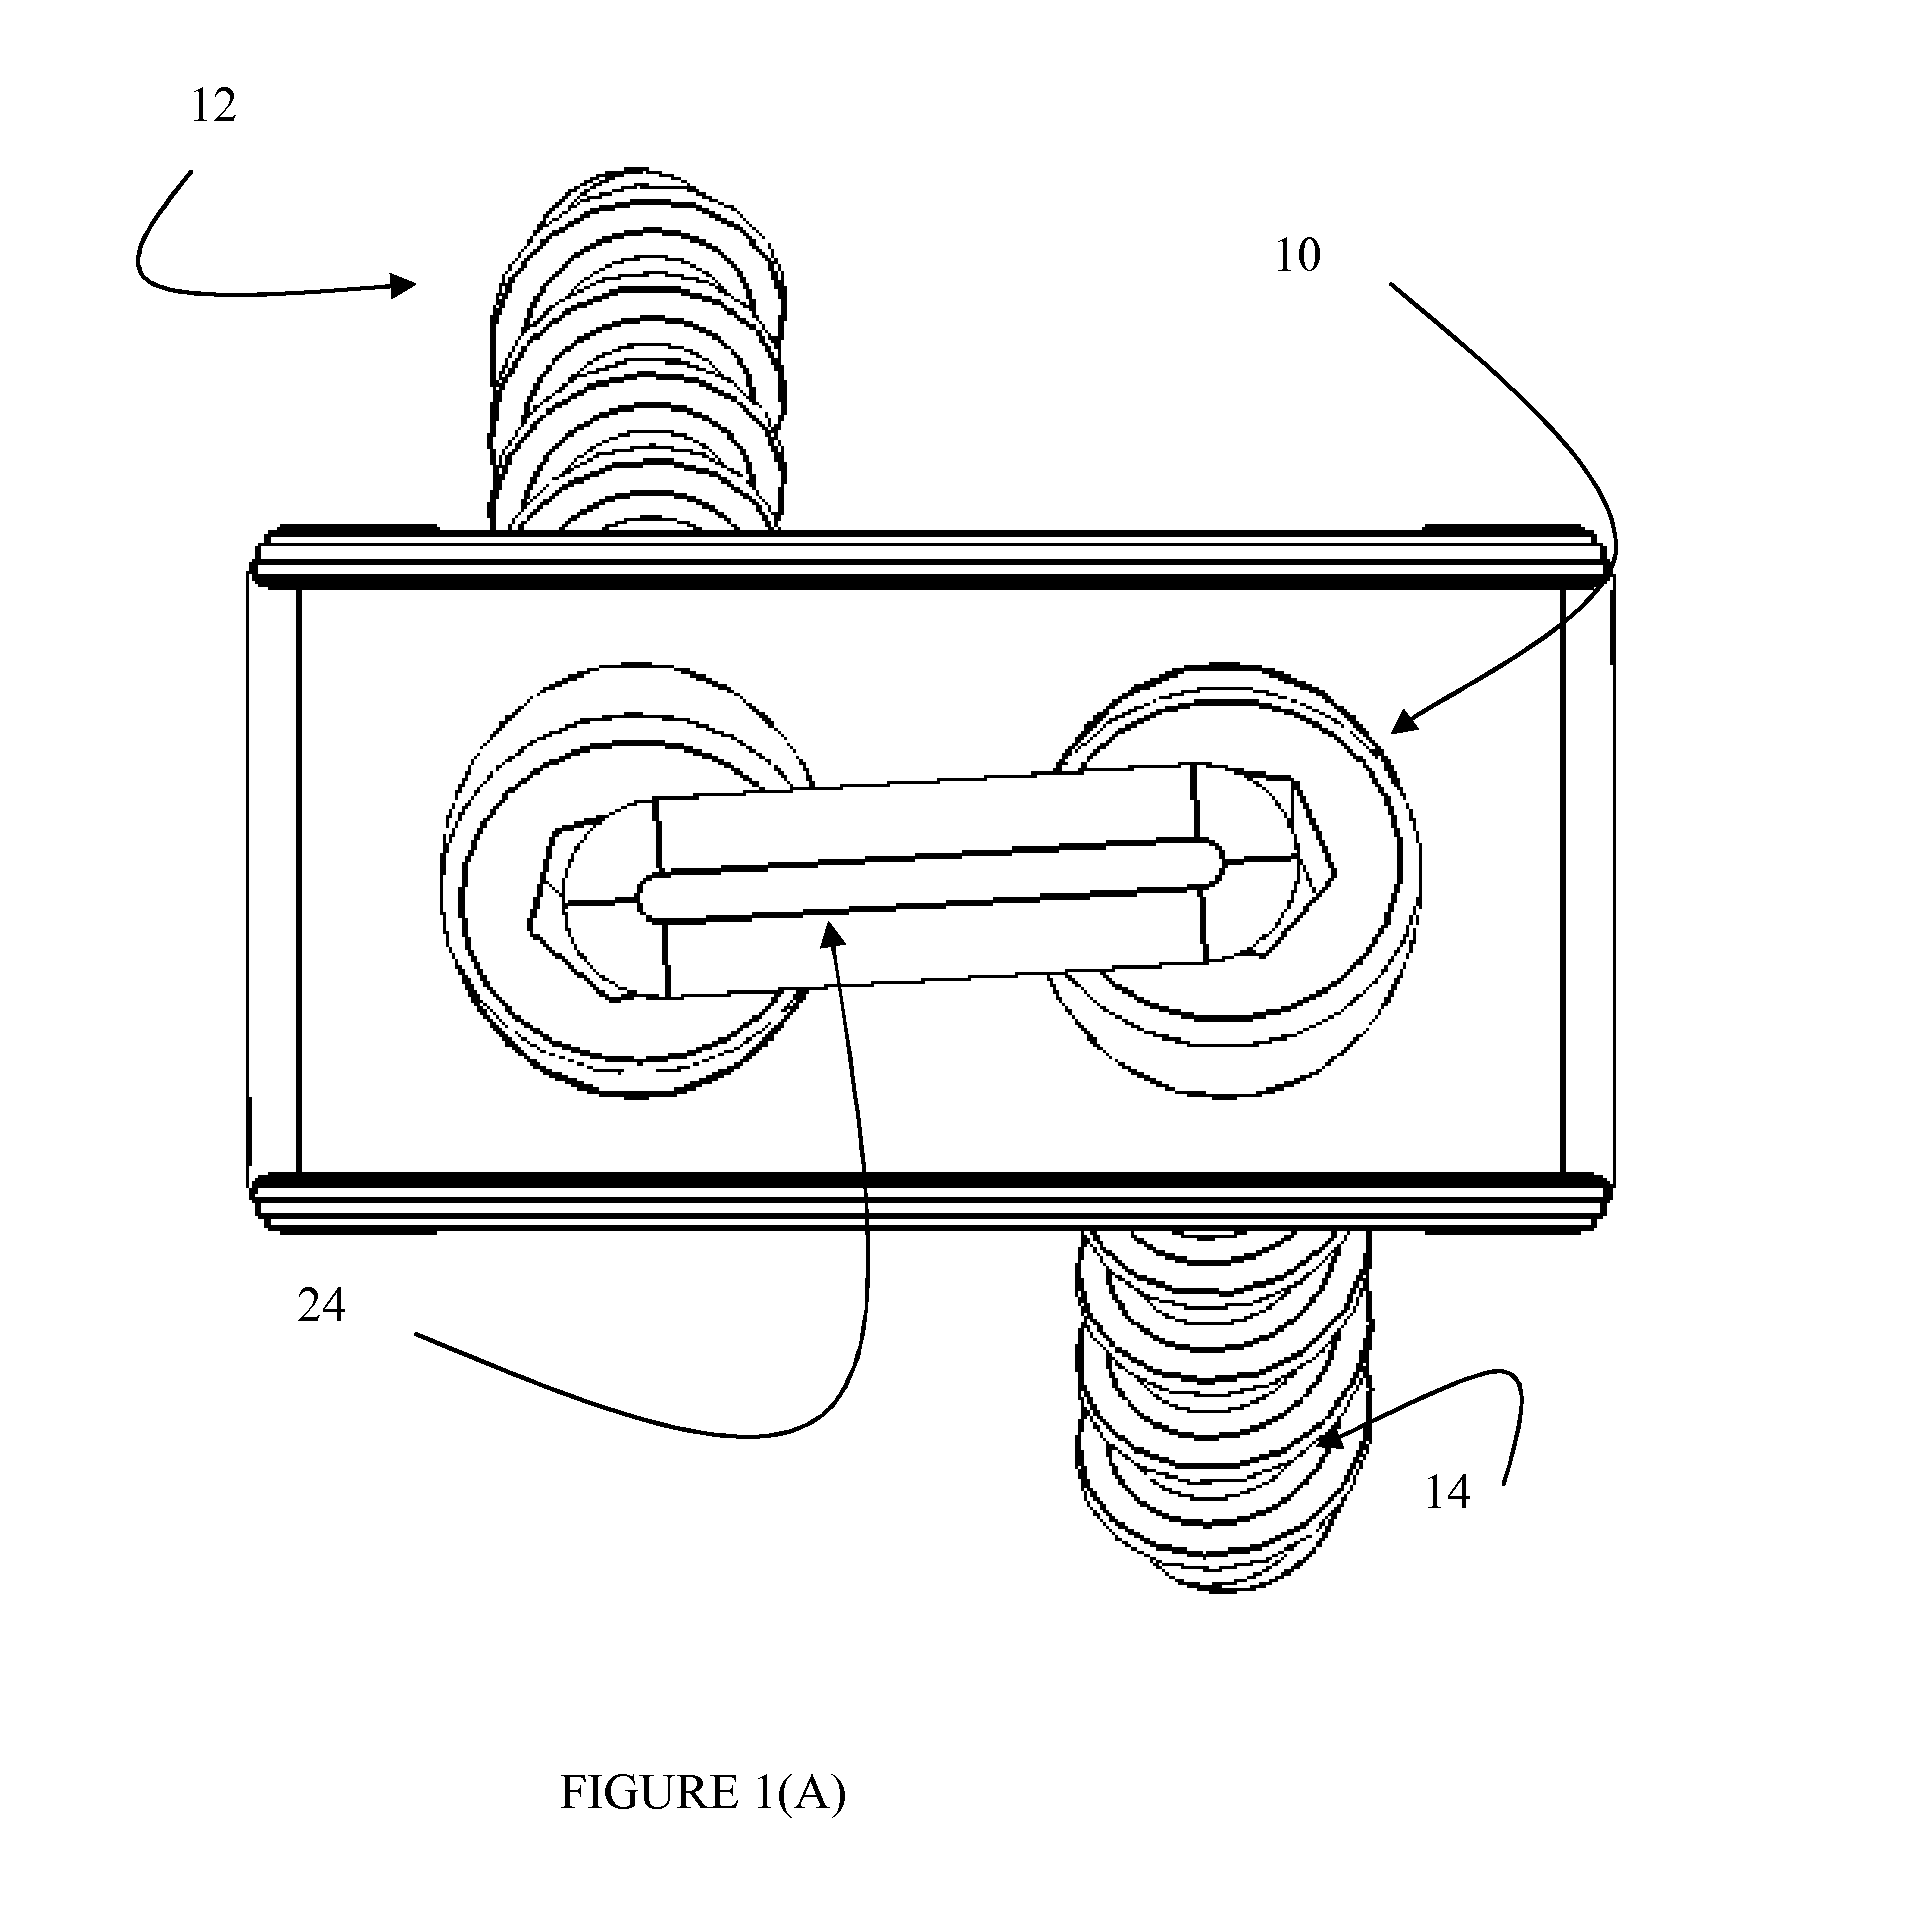 Bi-directional fixating/locking transvertebral body screw/intervertebral cage stand-alone constructs having a central screw locking lever, and pliers and devices for spinal fusion